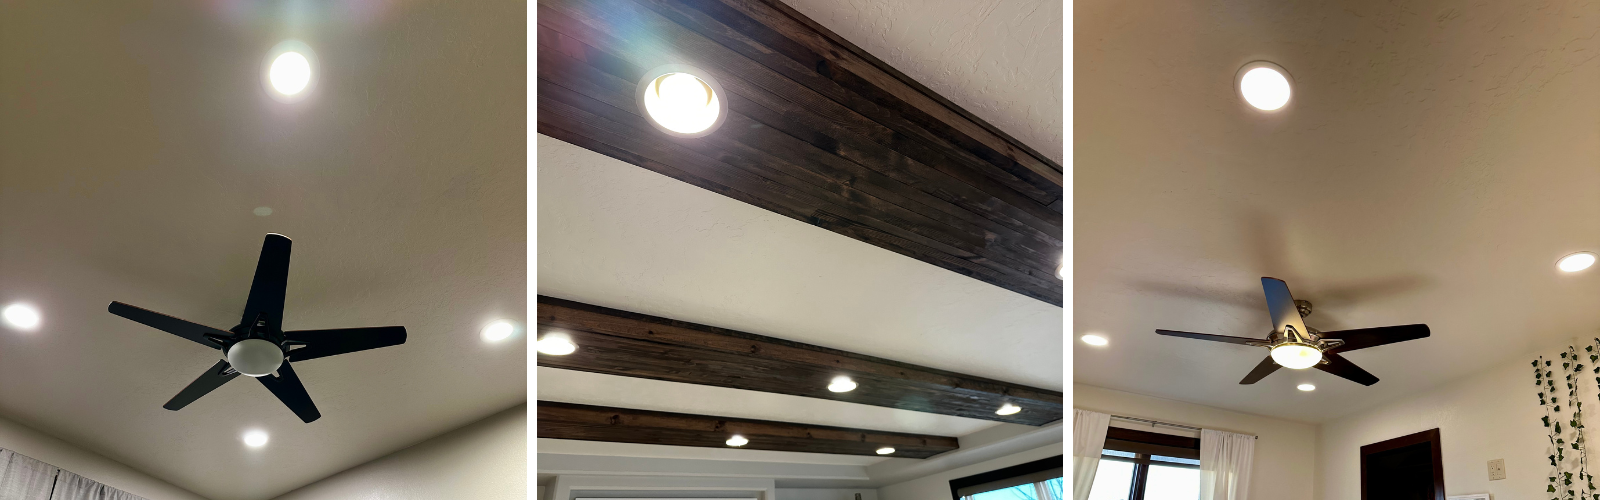 led recessed can light options